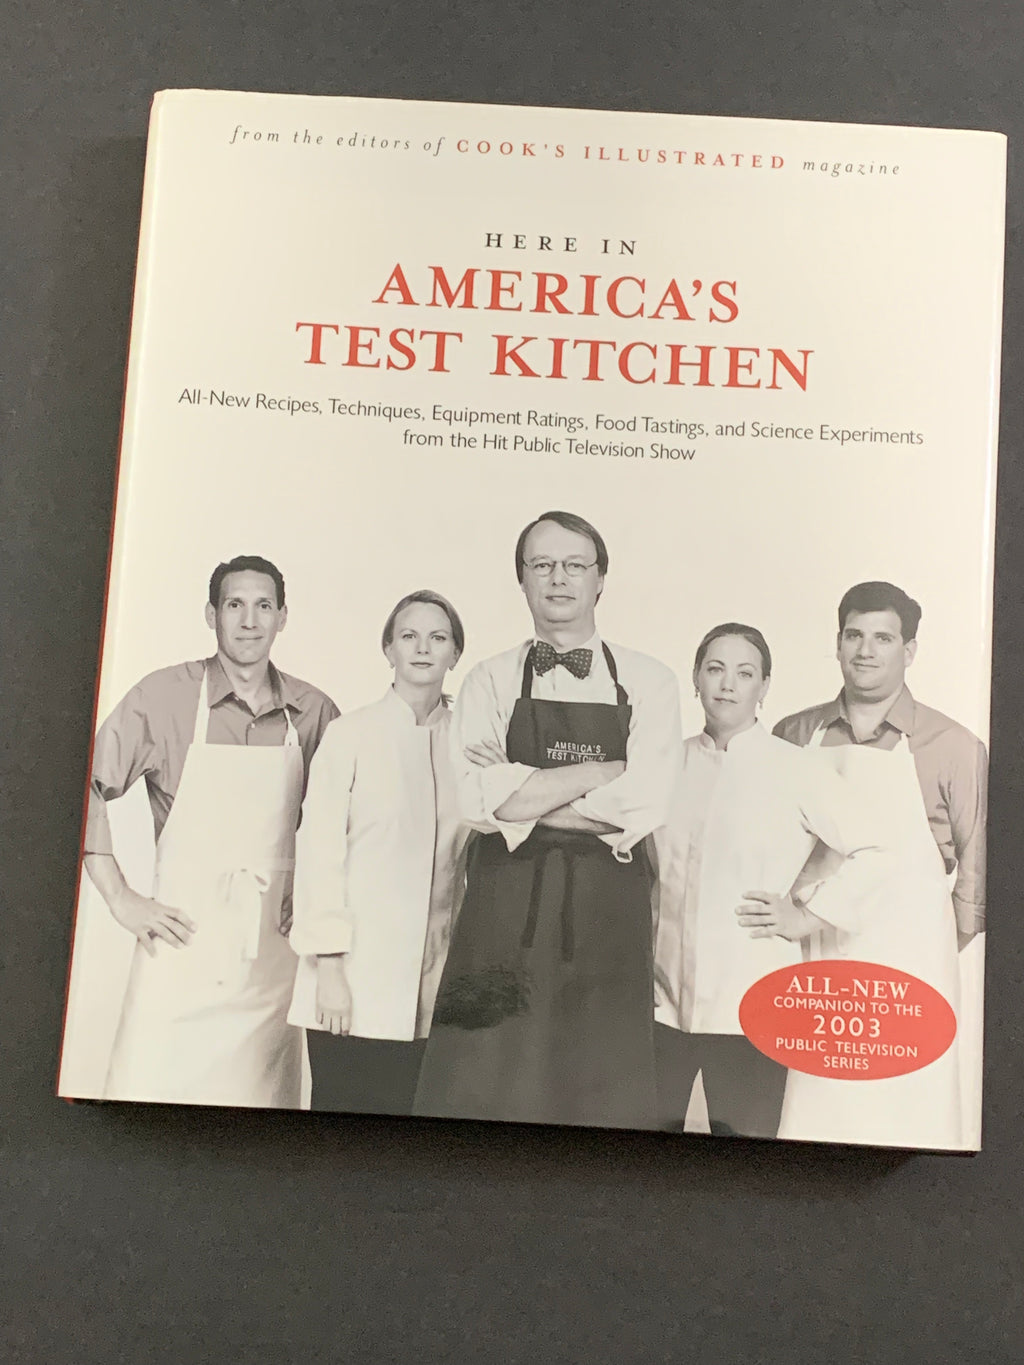 Here in America's Test Kitchen- From the Editor's of Cook's Illustrated Magazine